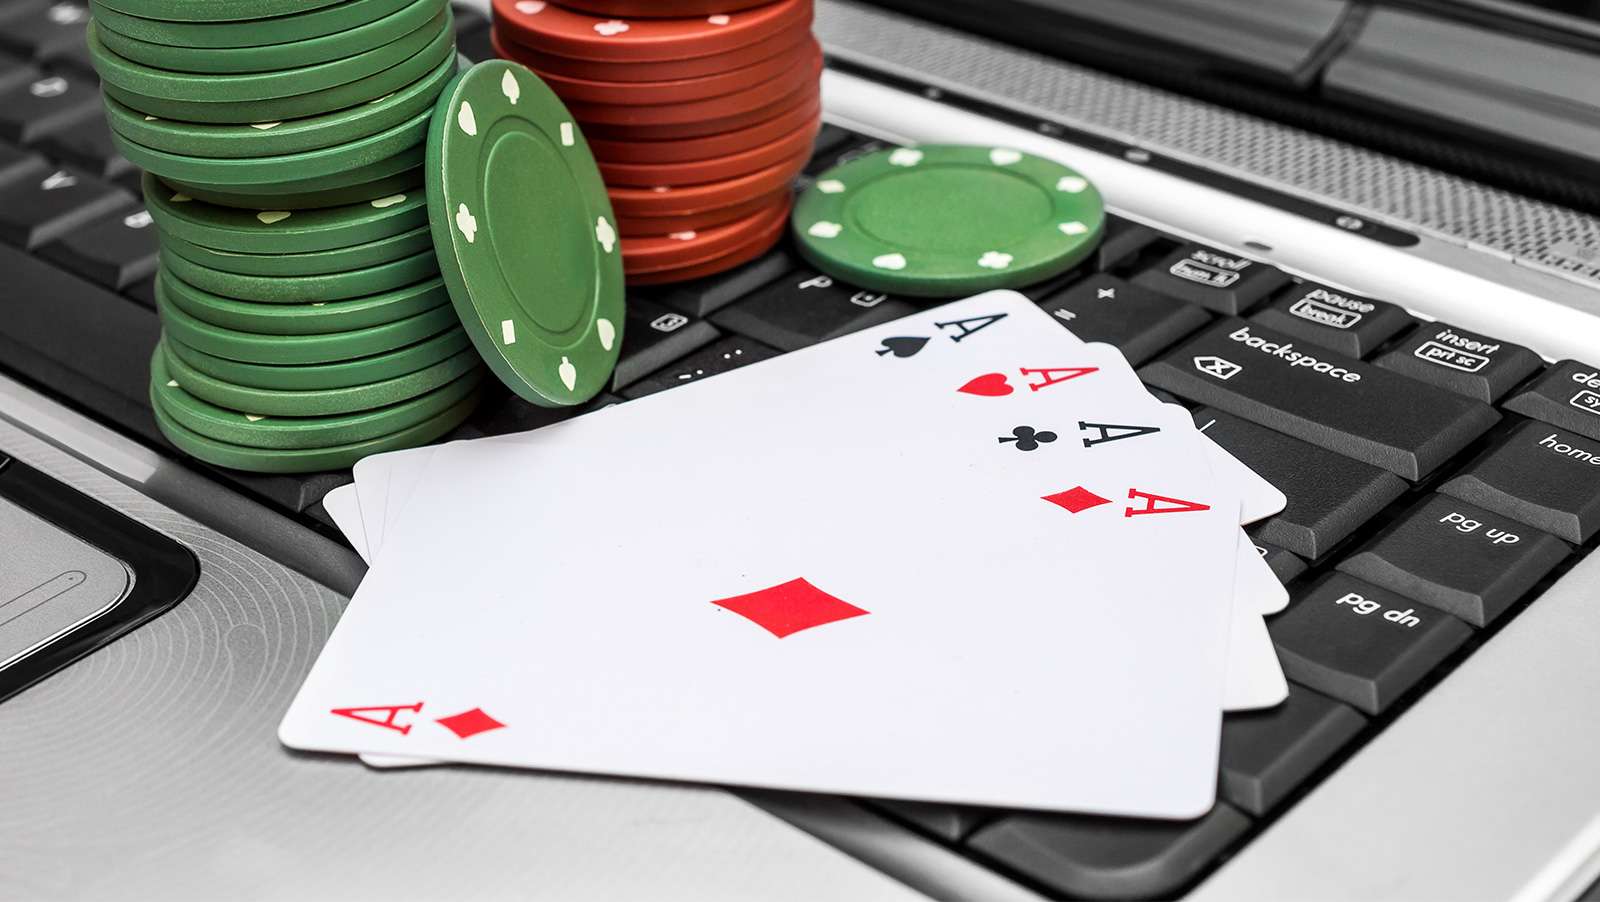 Features that make online casinos superior to land-based casinos